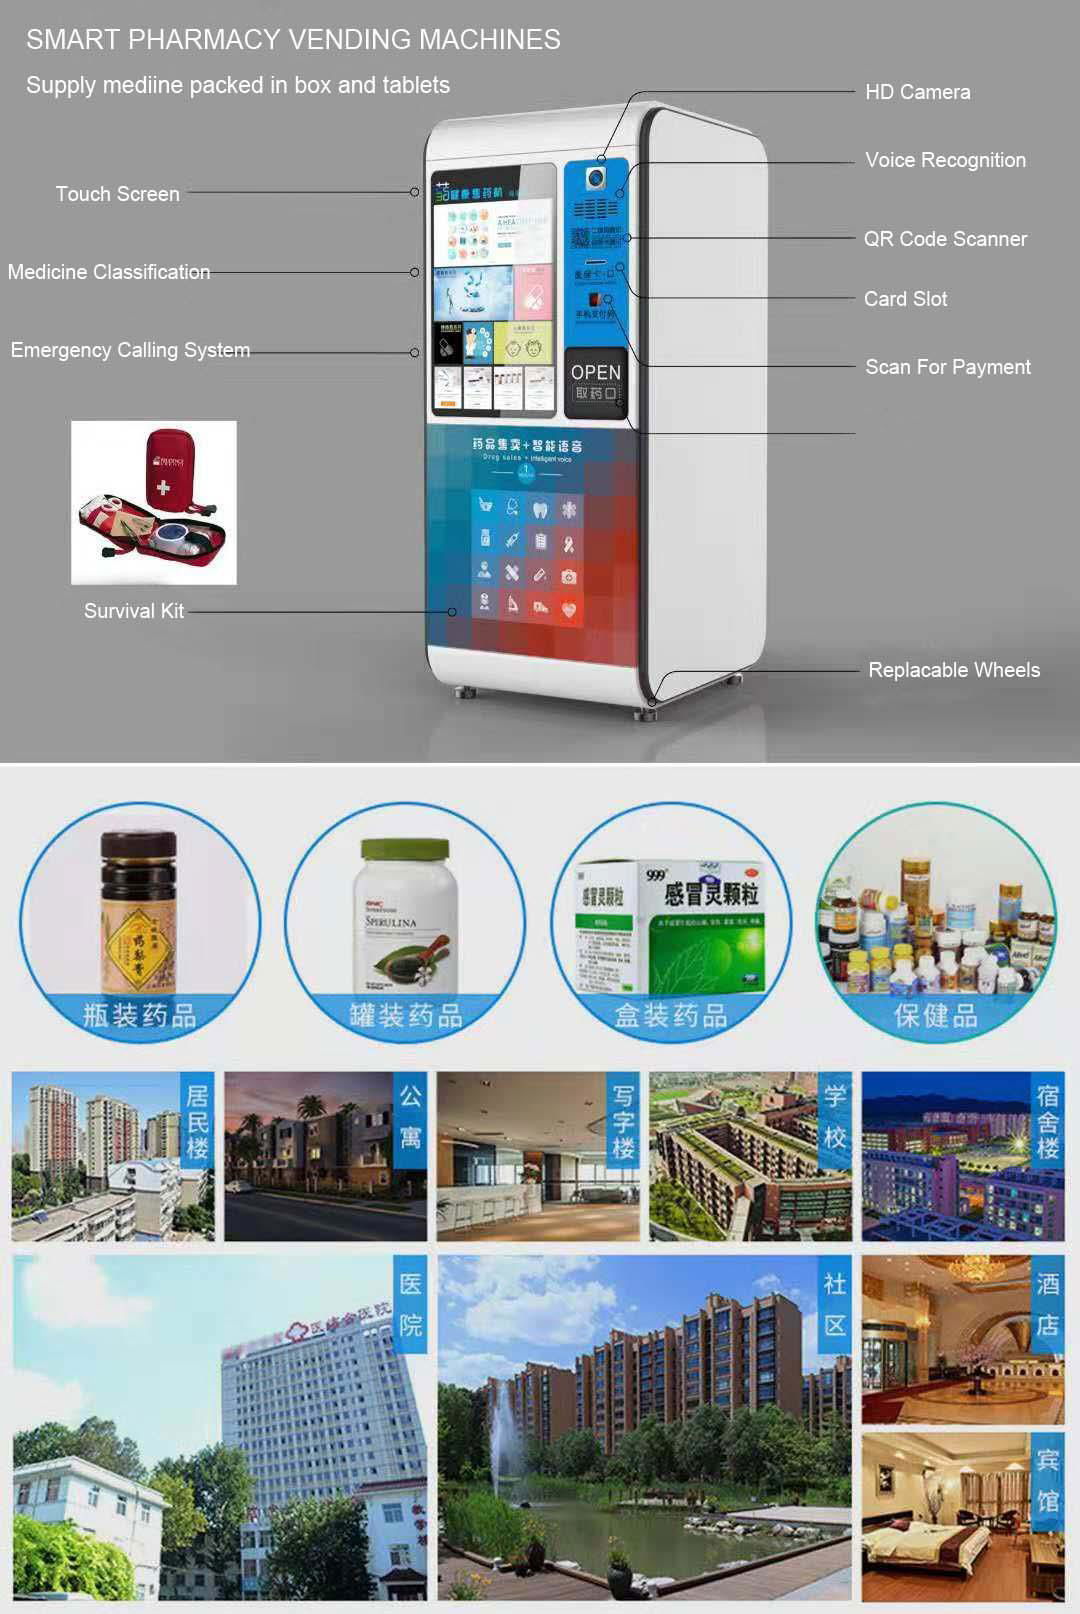 Pharmacy Vending Machines Supply Medicines In Box Tablets 3